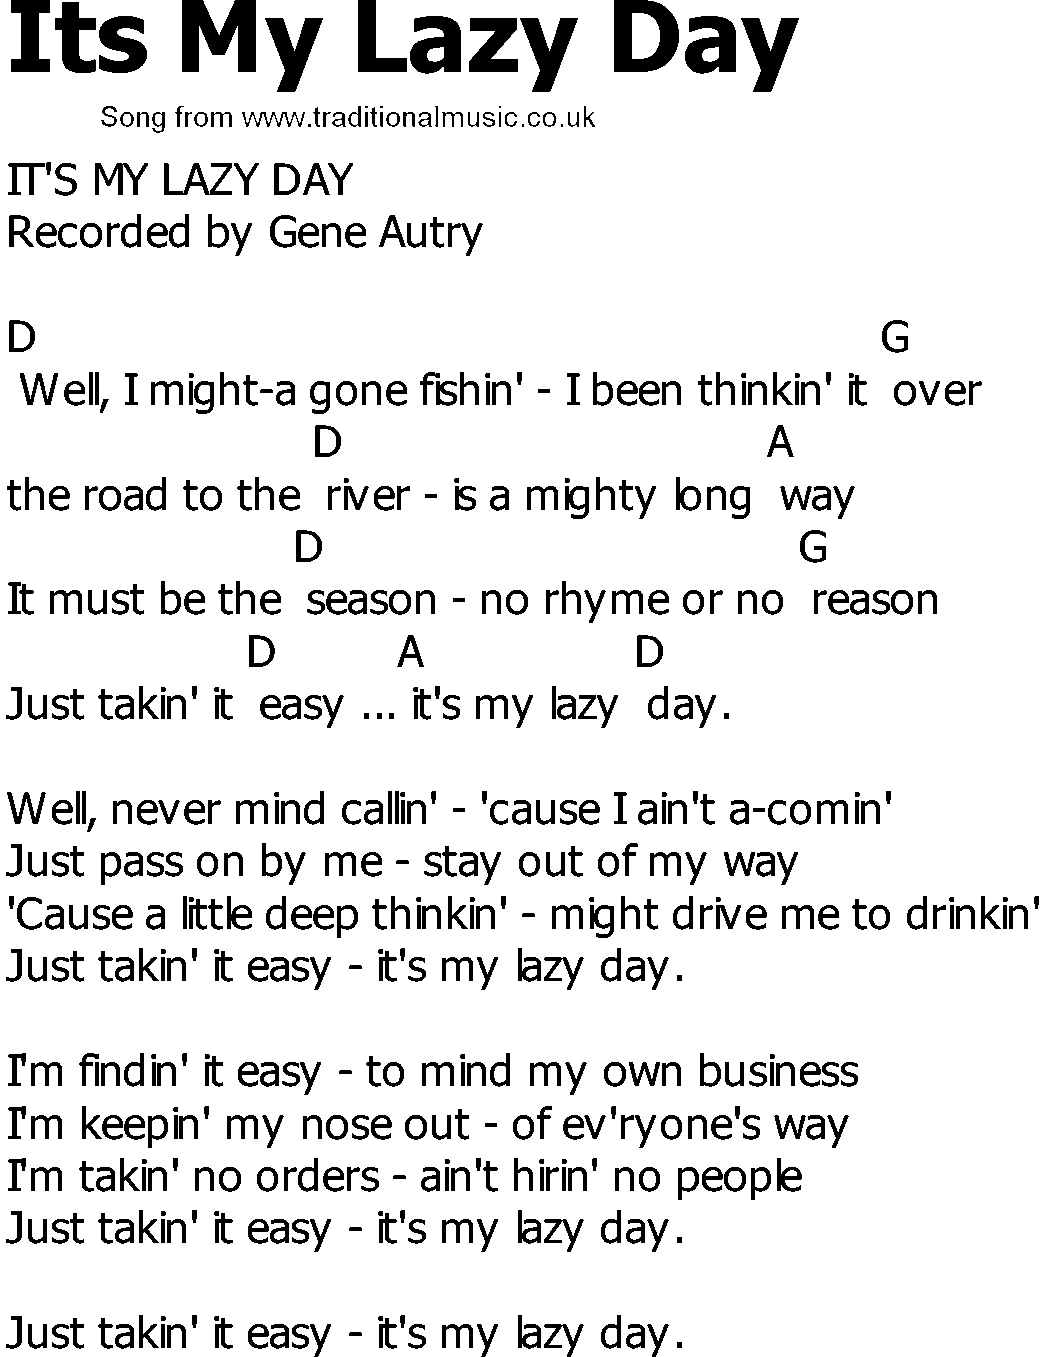 Old Country song lyrics with chords - Its My Lazy Day